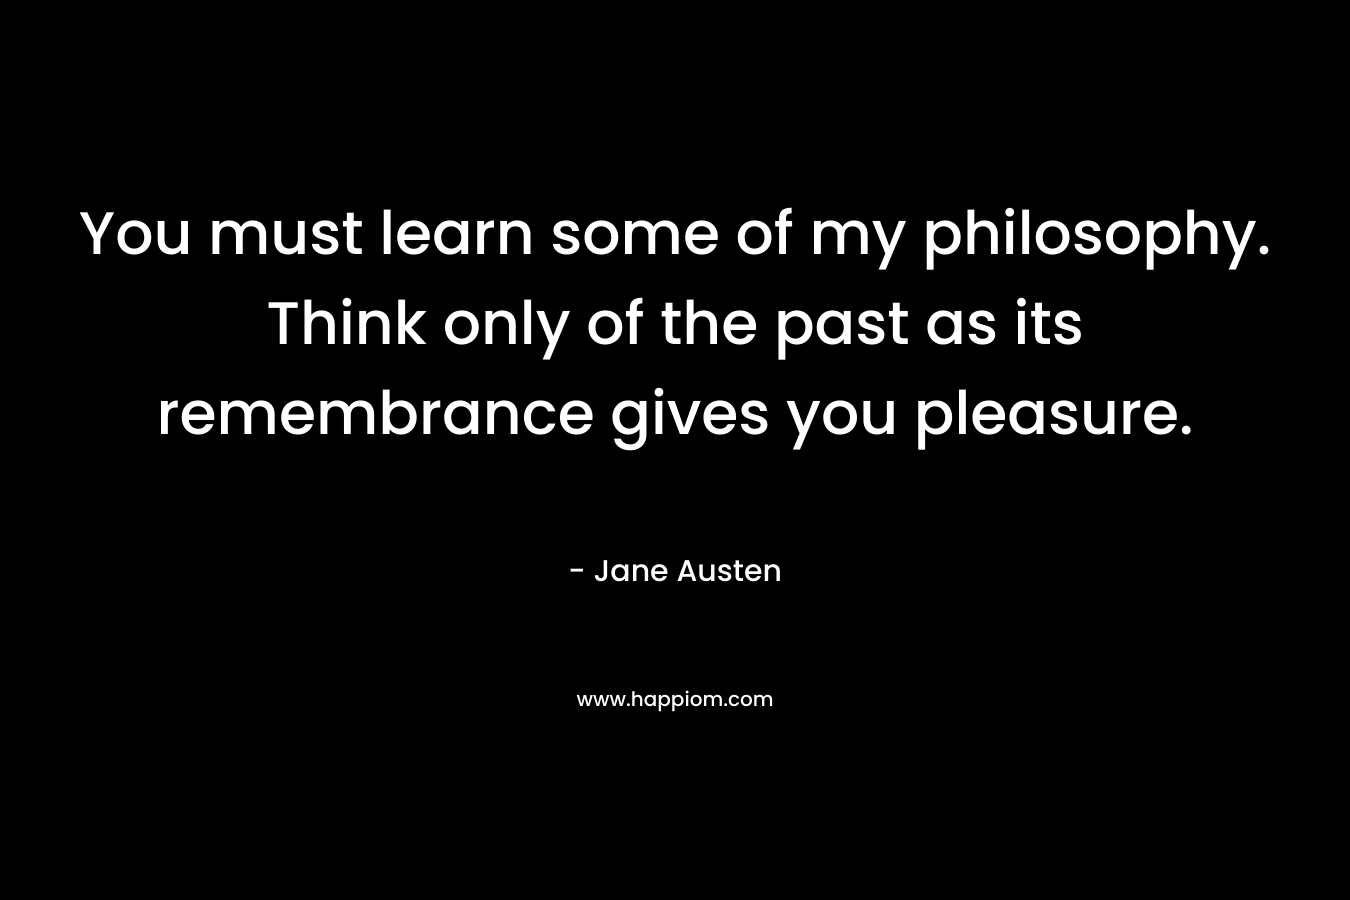 You must learn some of my philosophy. Think only of the past as its remembrance gives you pleasure. – Jane Austen